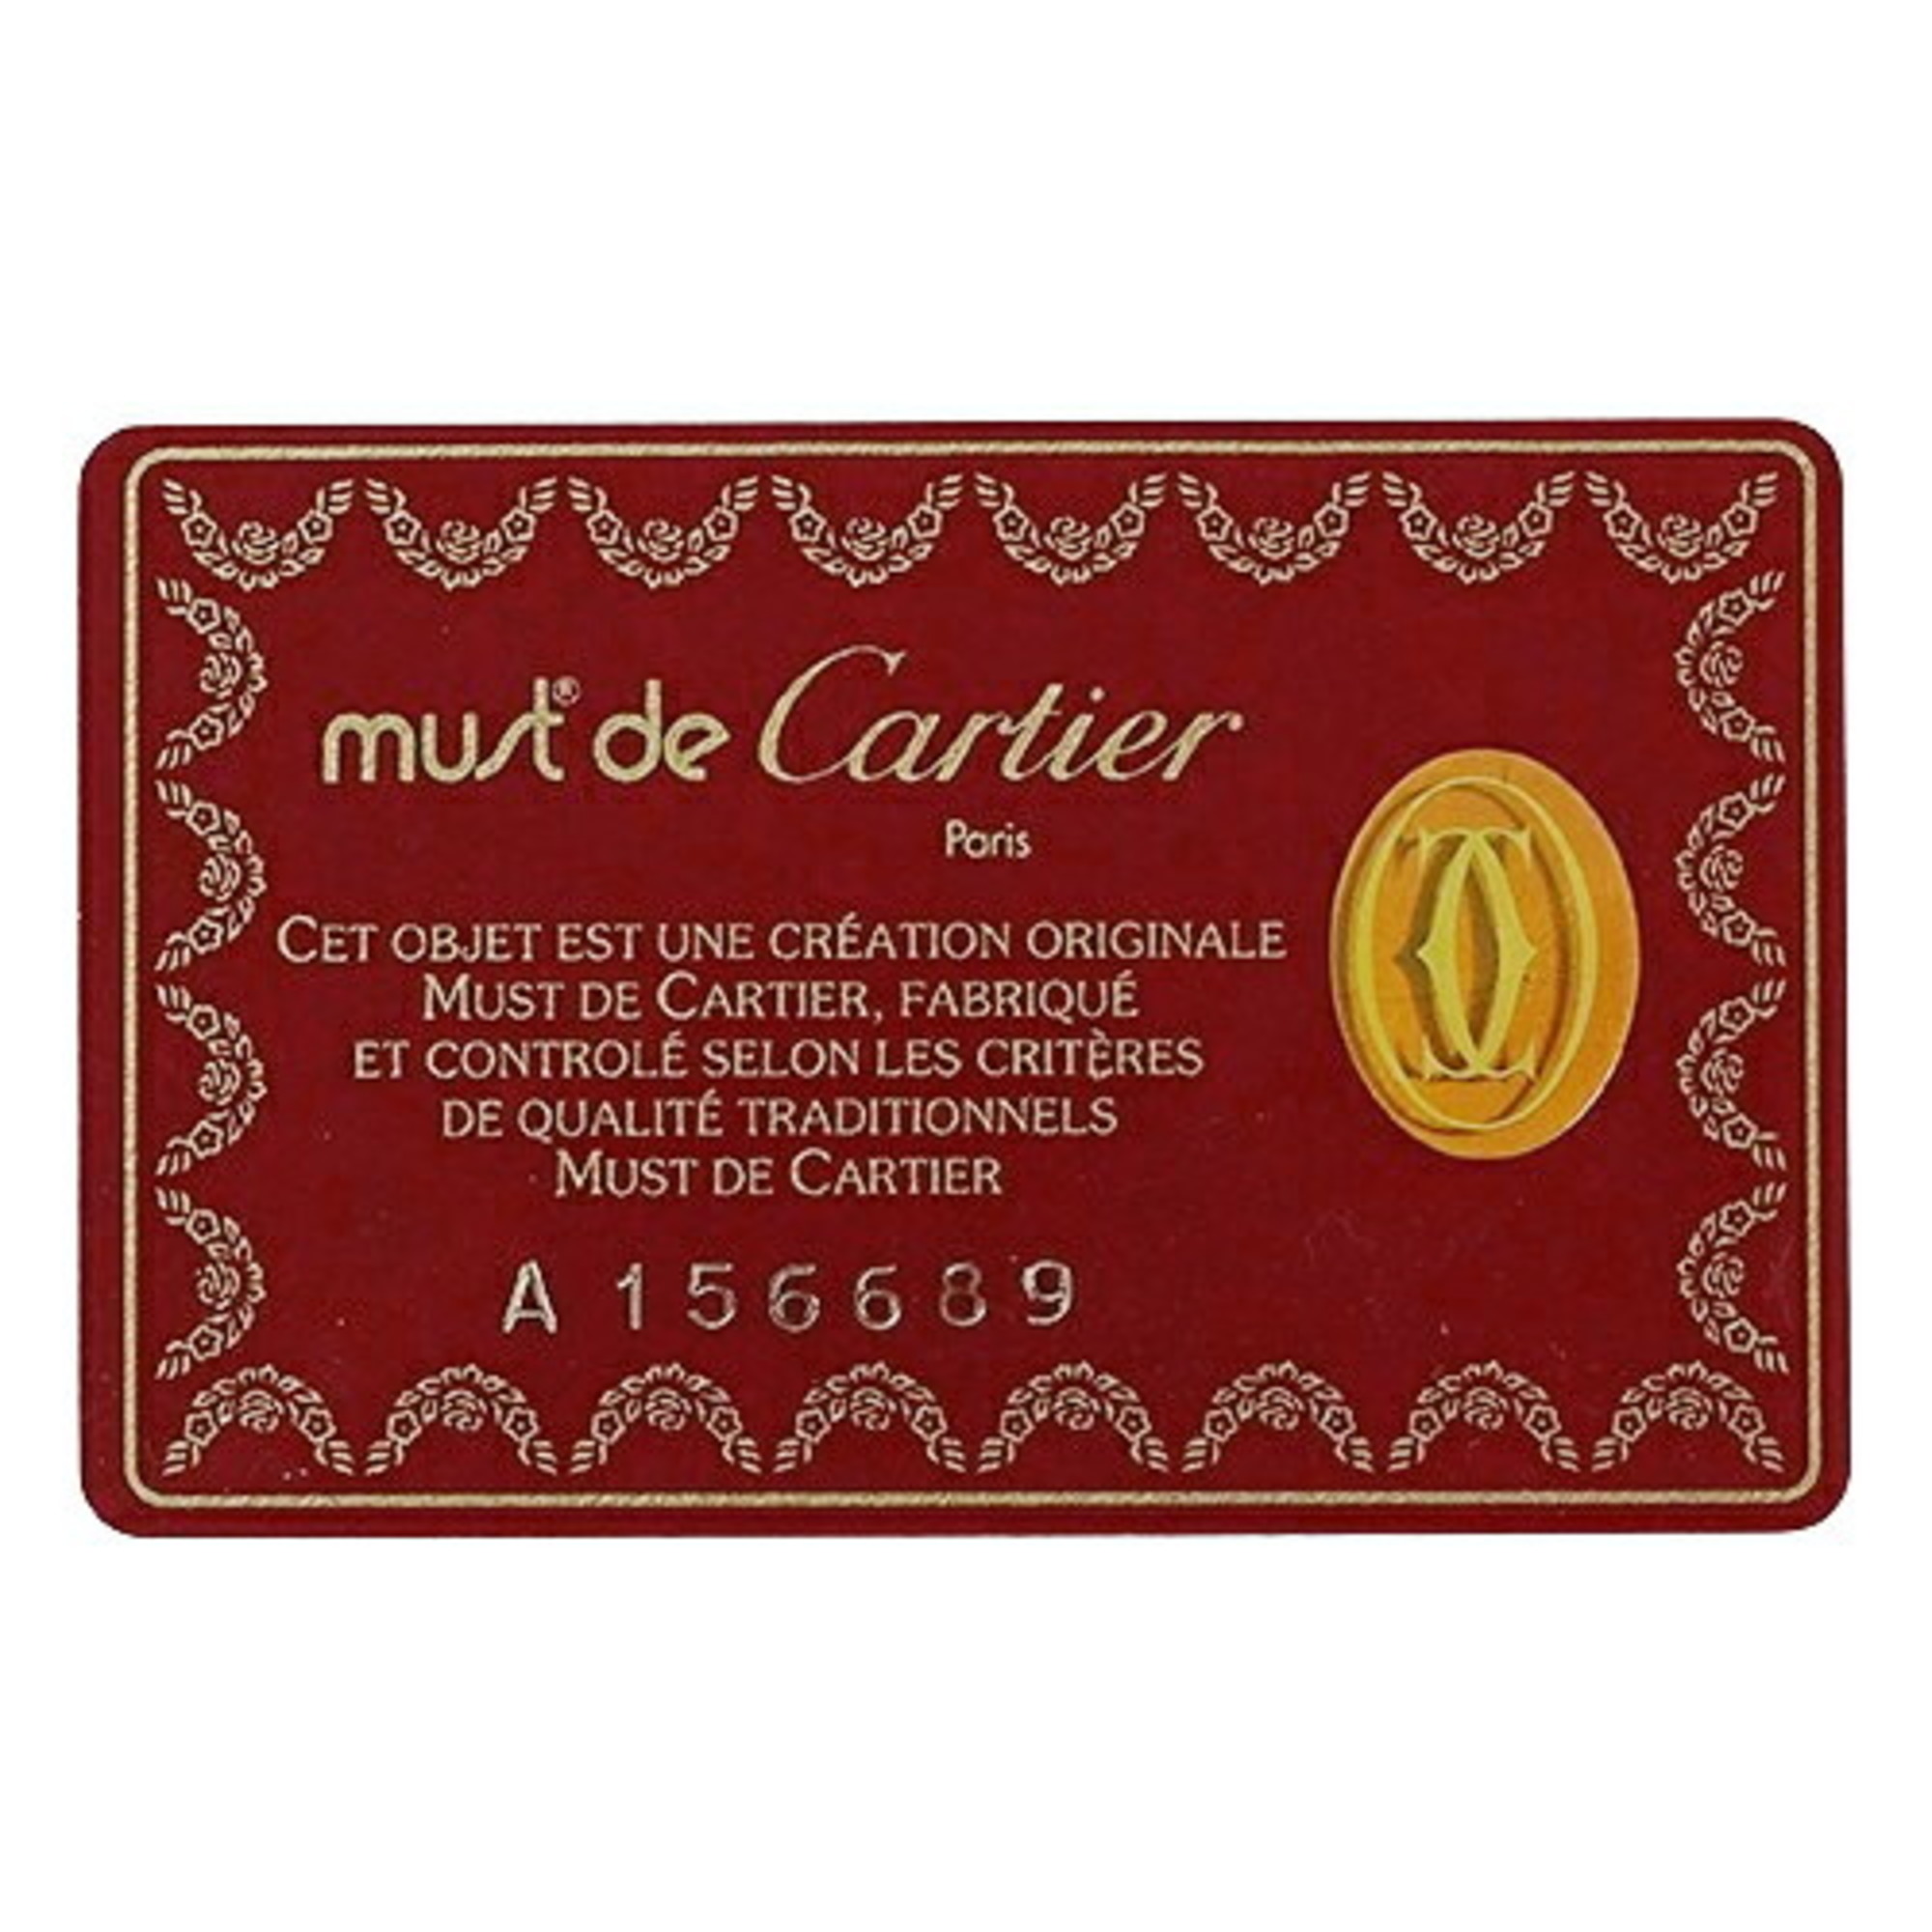 Cartier Bag Ladies Brand Shoulder Must-have Leather Bordeaux Wine Red Compact